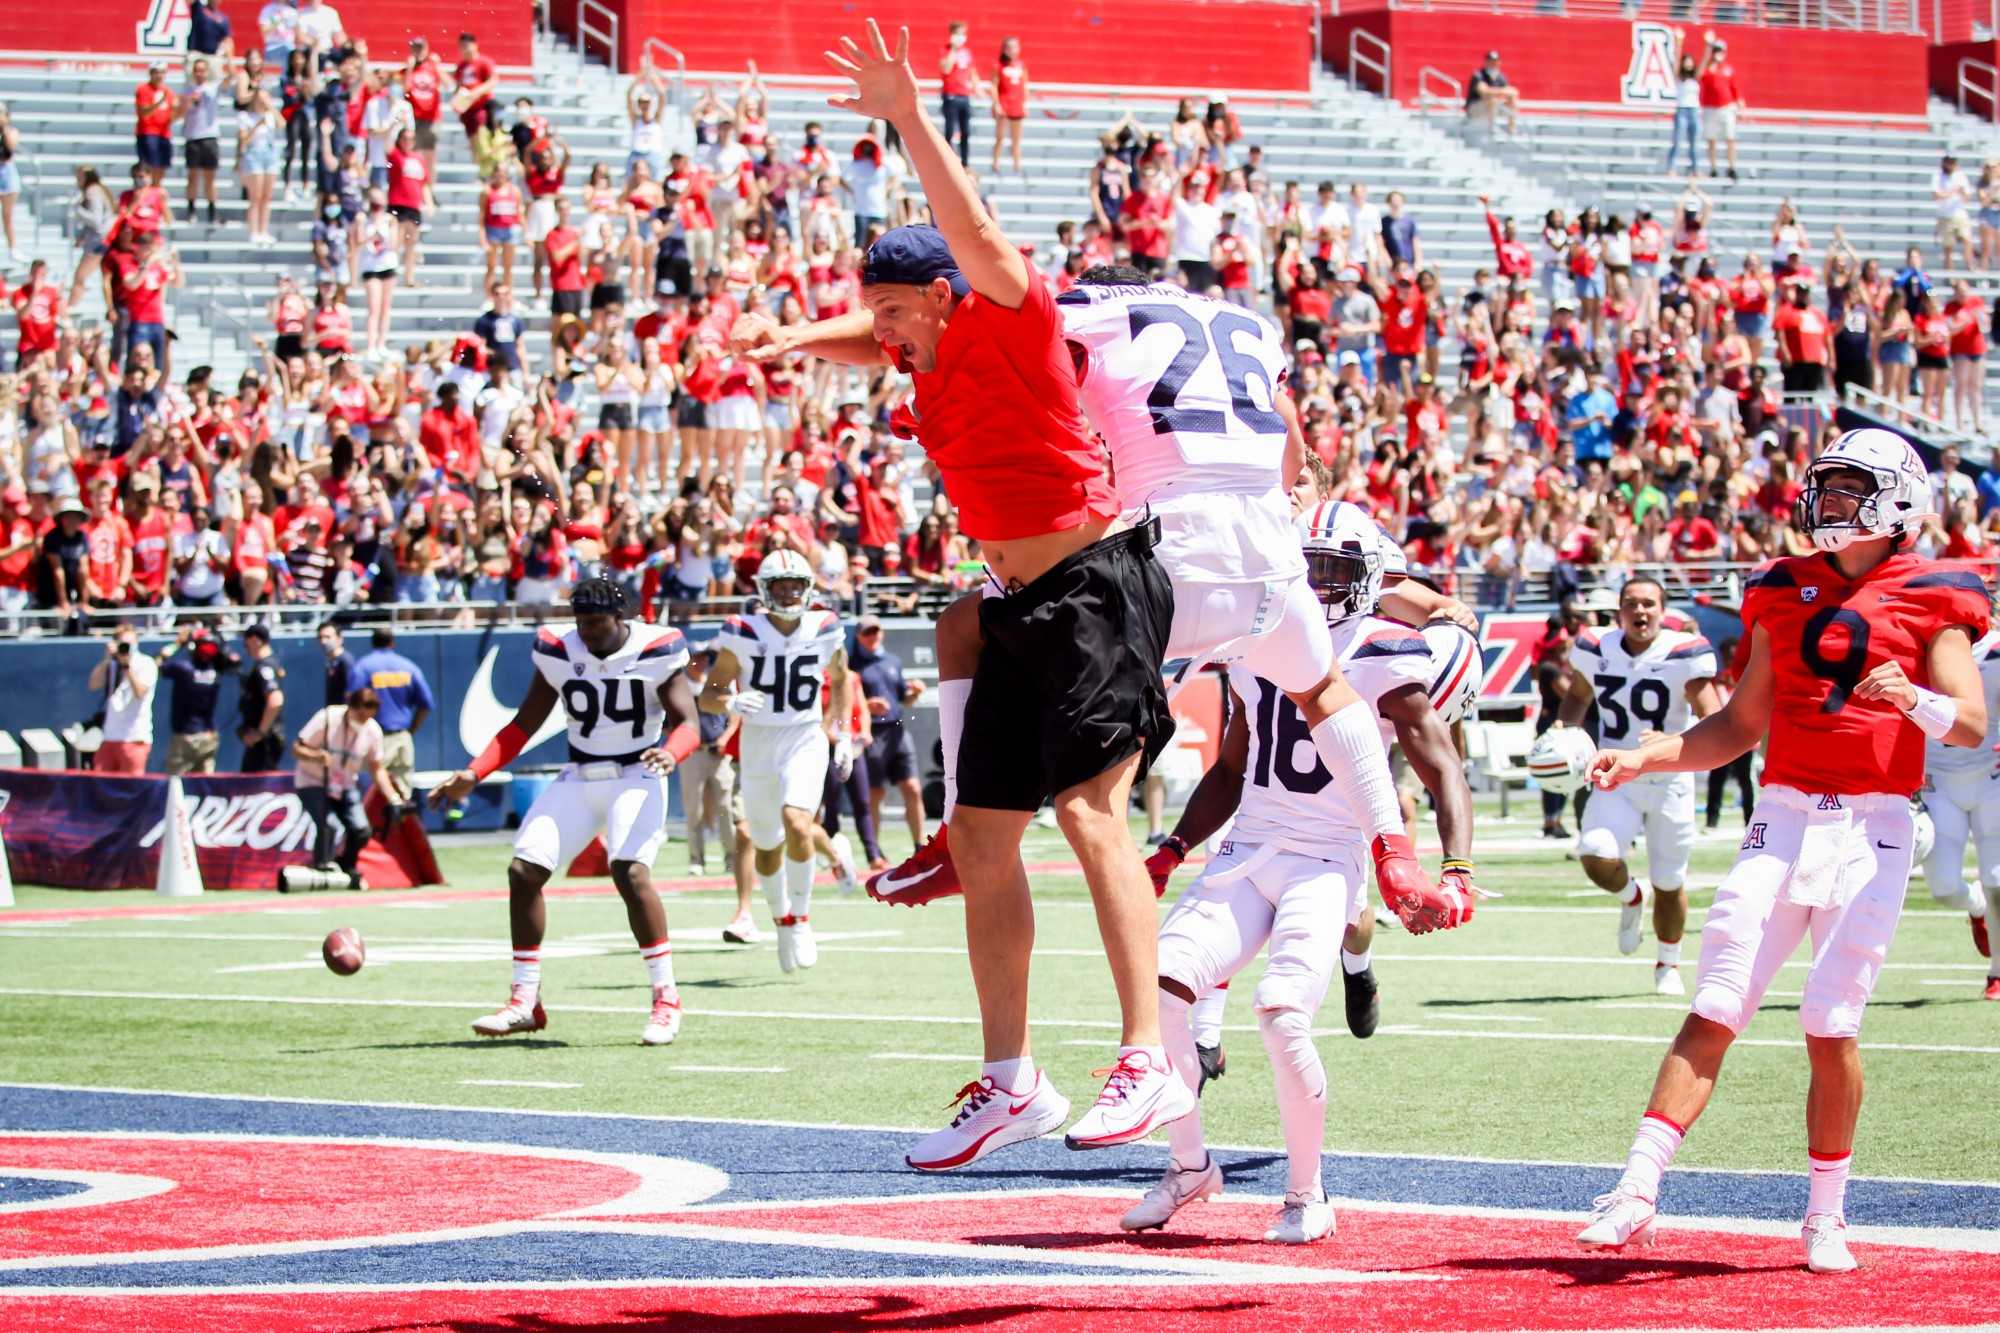 Gronkowski scores a touchdown after the Spring Game on Saturday, April 24 in Tucson, Ariz. Gronkowski’s team defeated Bruschi’s team 17-13.
